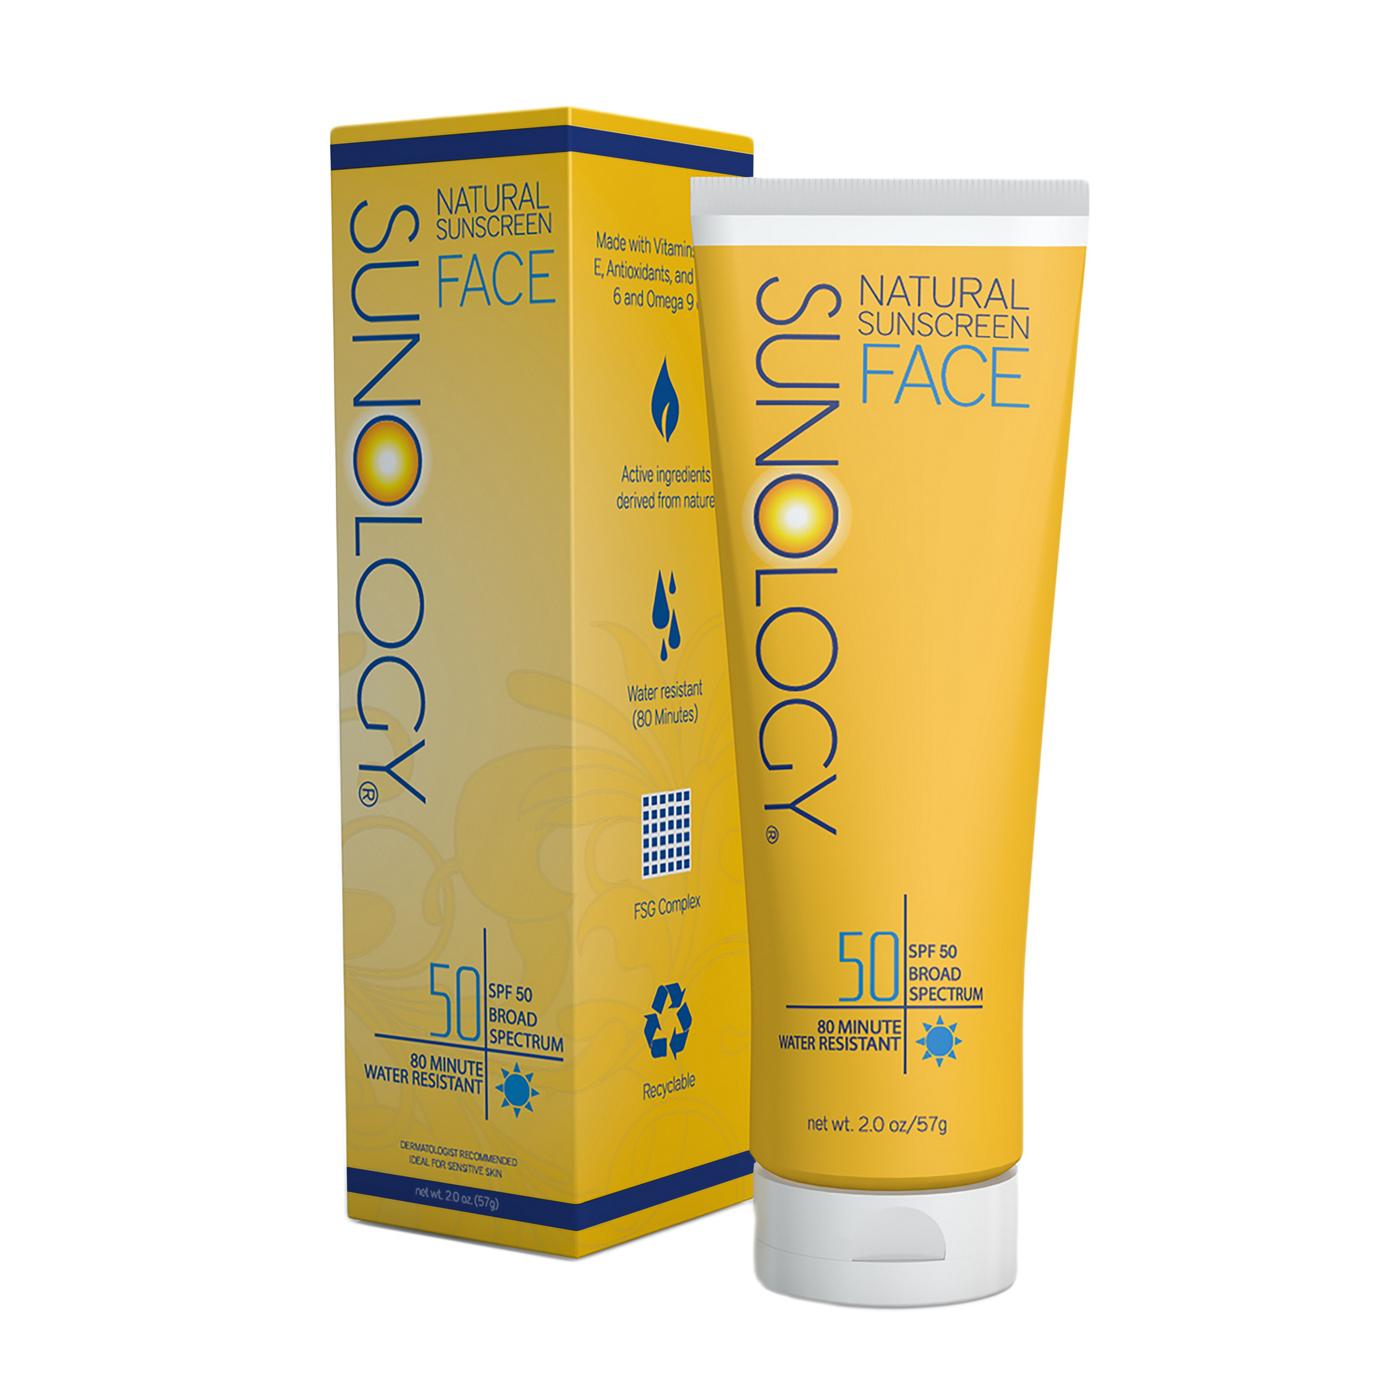 Sunology Natural Sunscreen Face SPF 50 Lotion; image 1 of 2